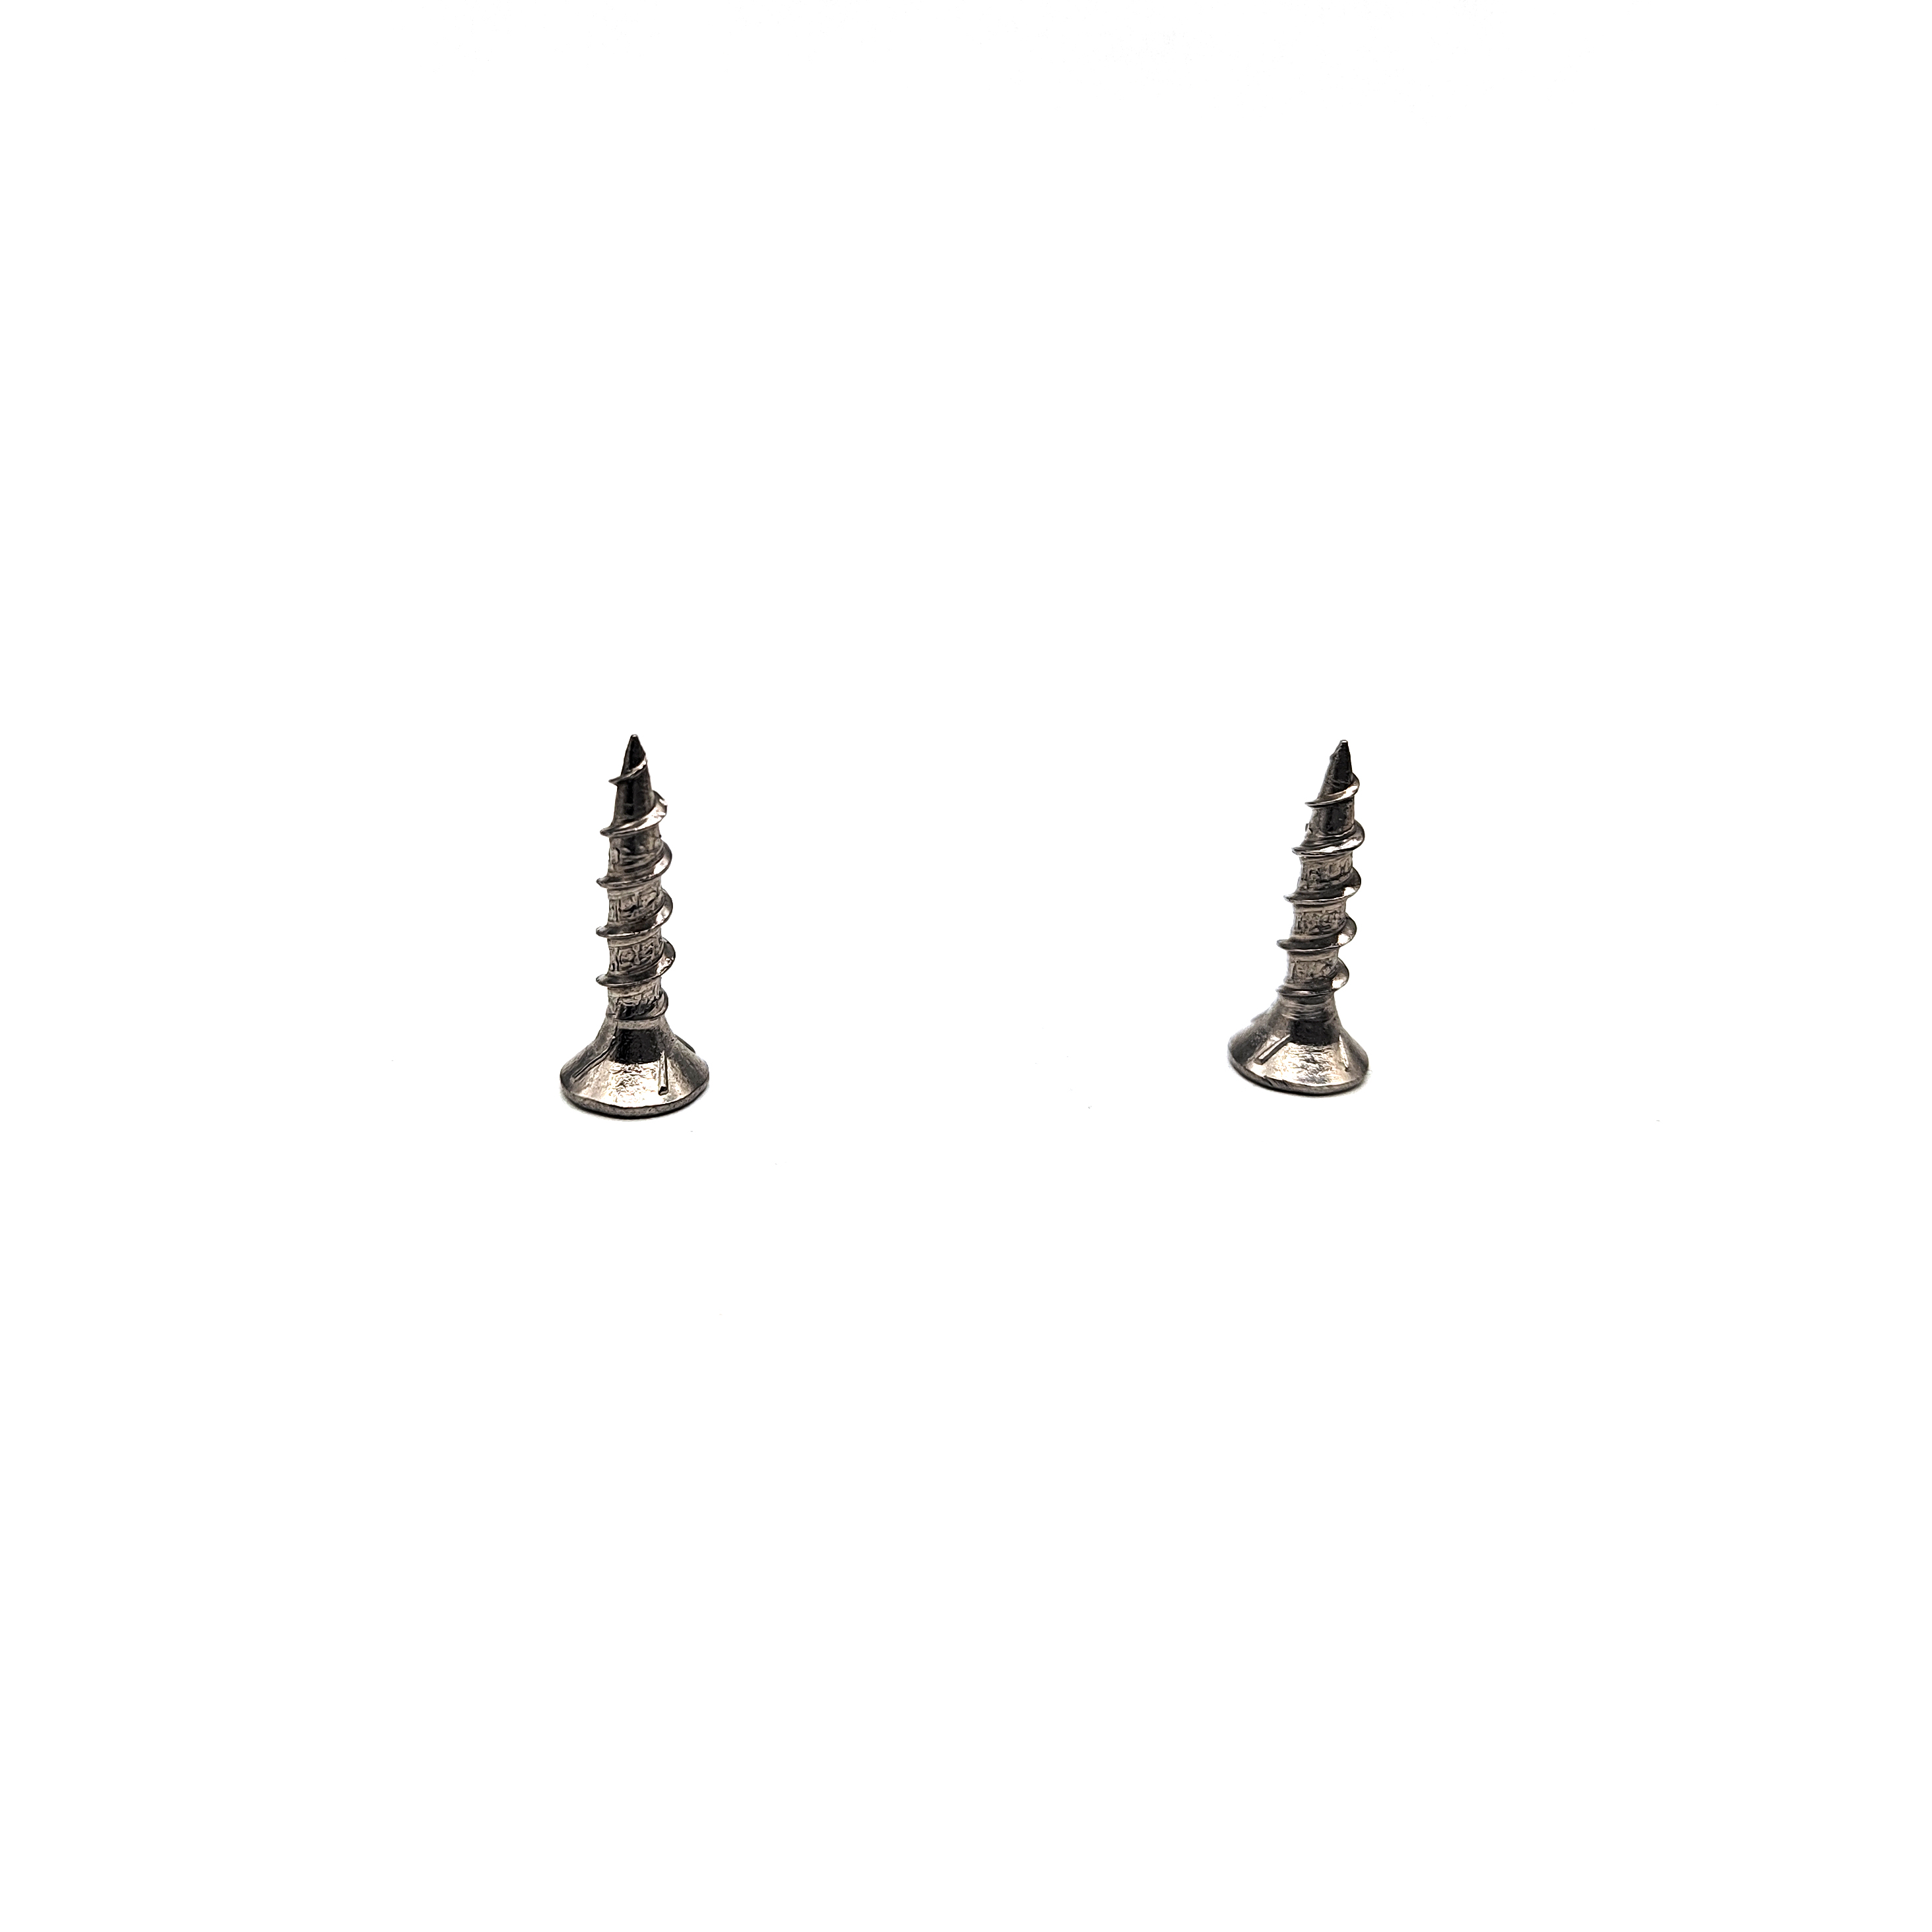 Stainless Steel 304 316 Square Recessed Countersunk Head Self Tapping Screws